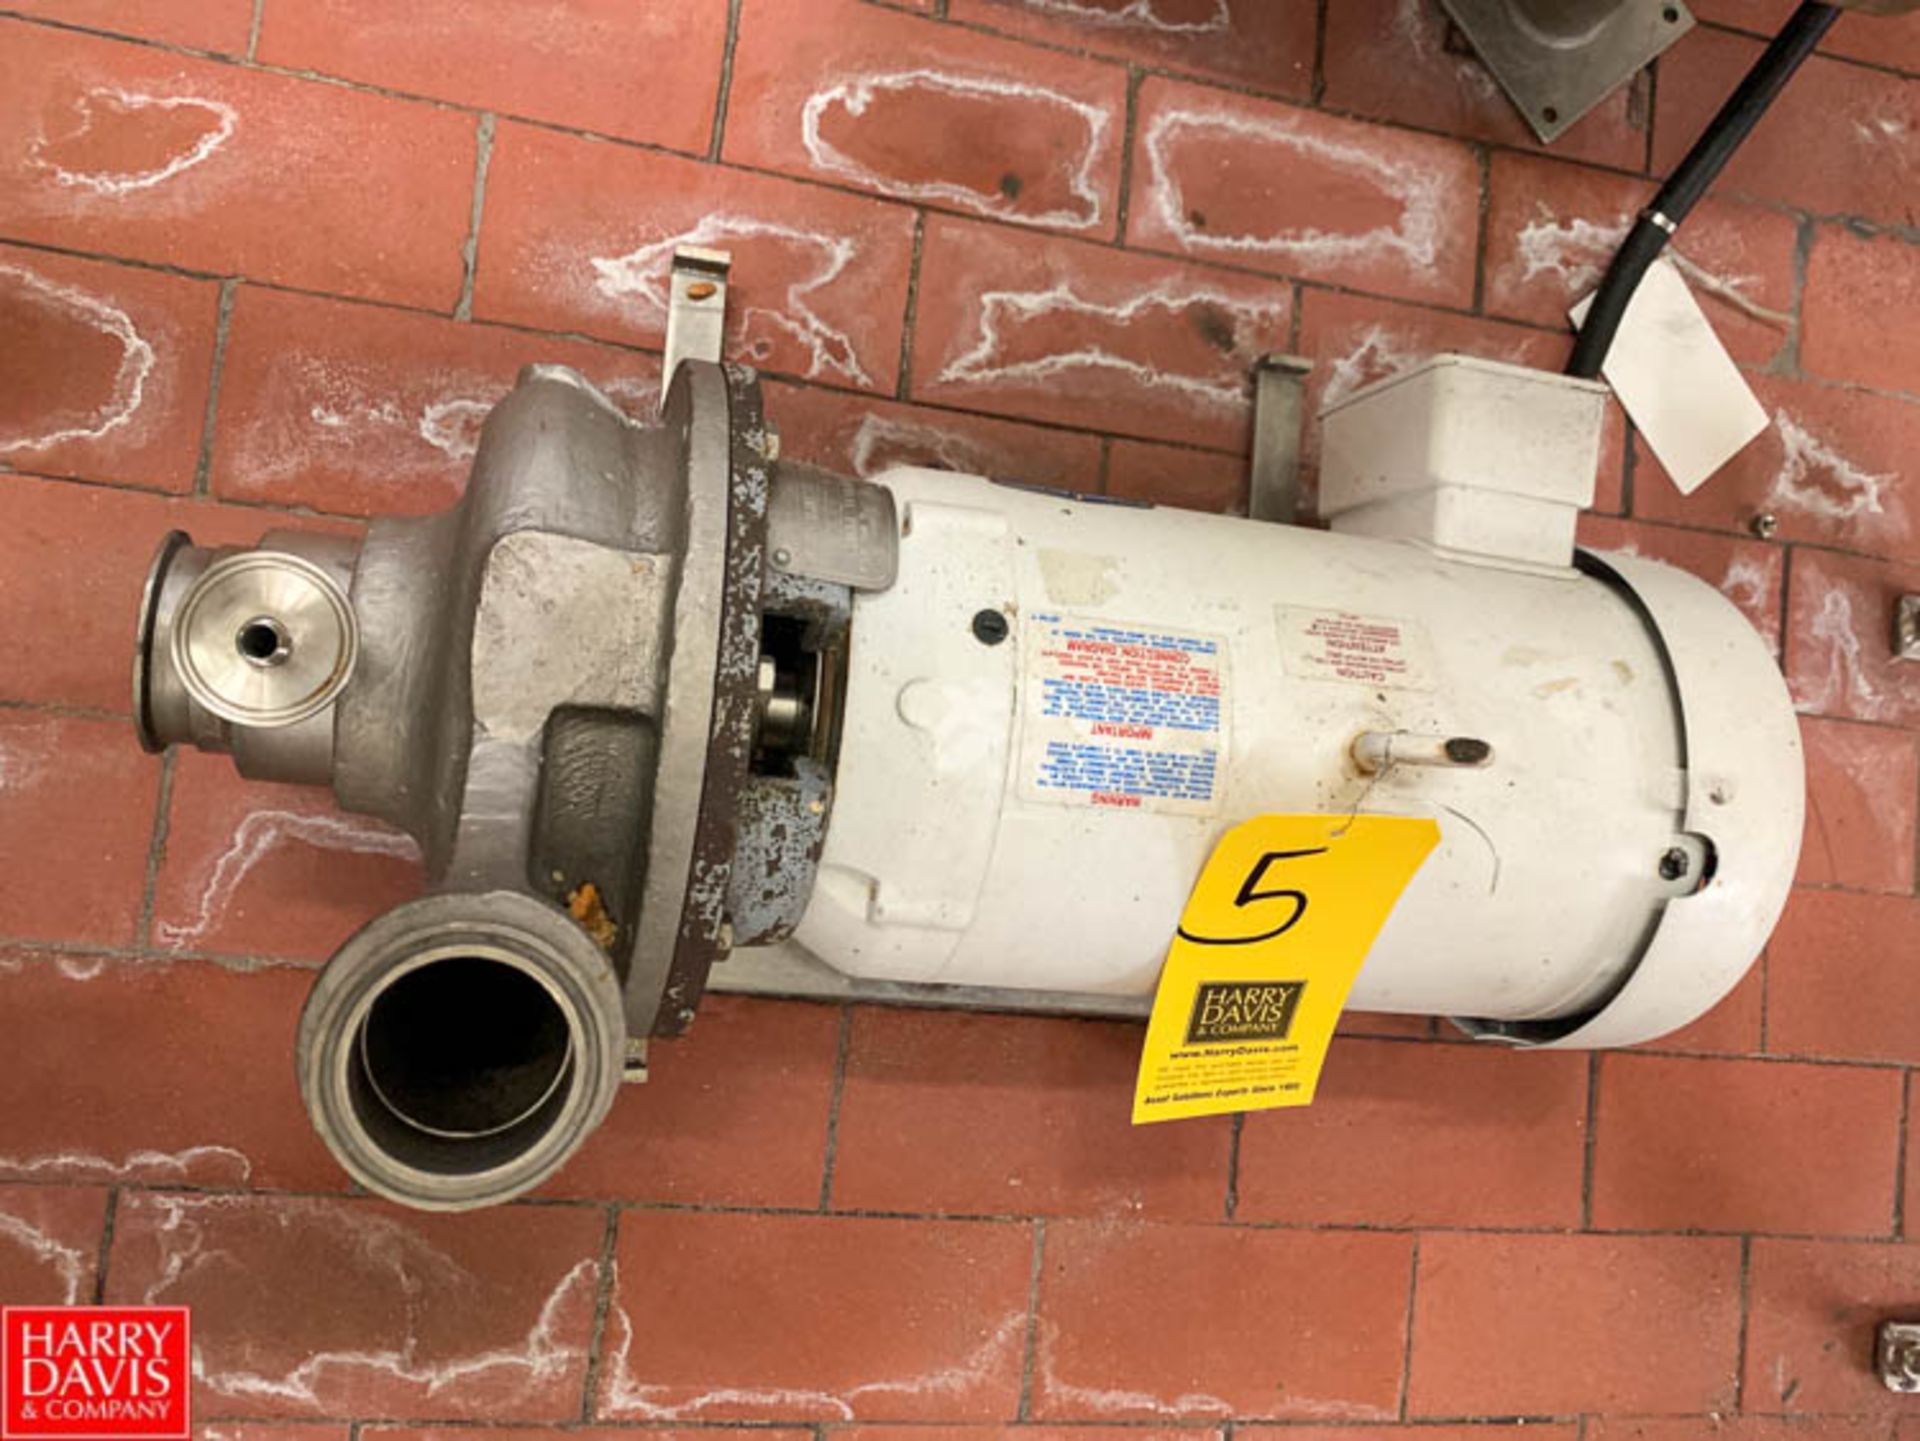 Ampco 7.5 HP Pump with Baldor 3,450 RPM Motor and 2" x 2.5" S/S Head, Clamp Type Rigging Fee: $50 *